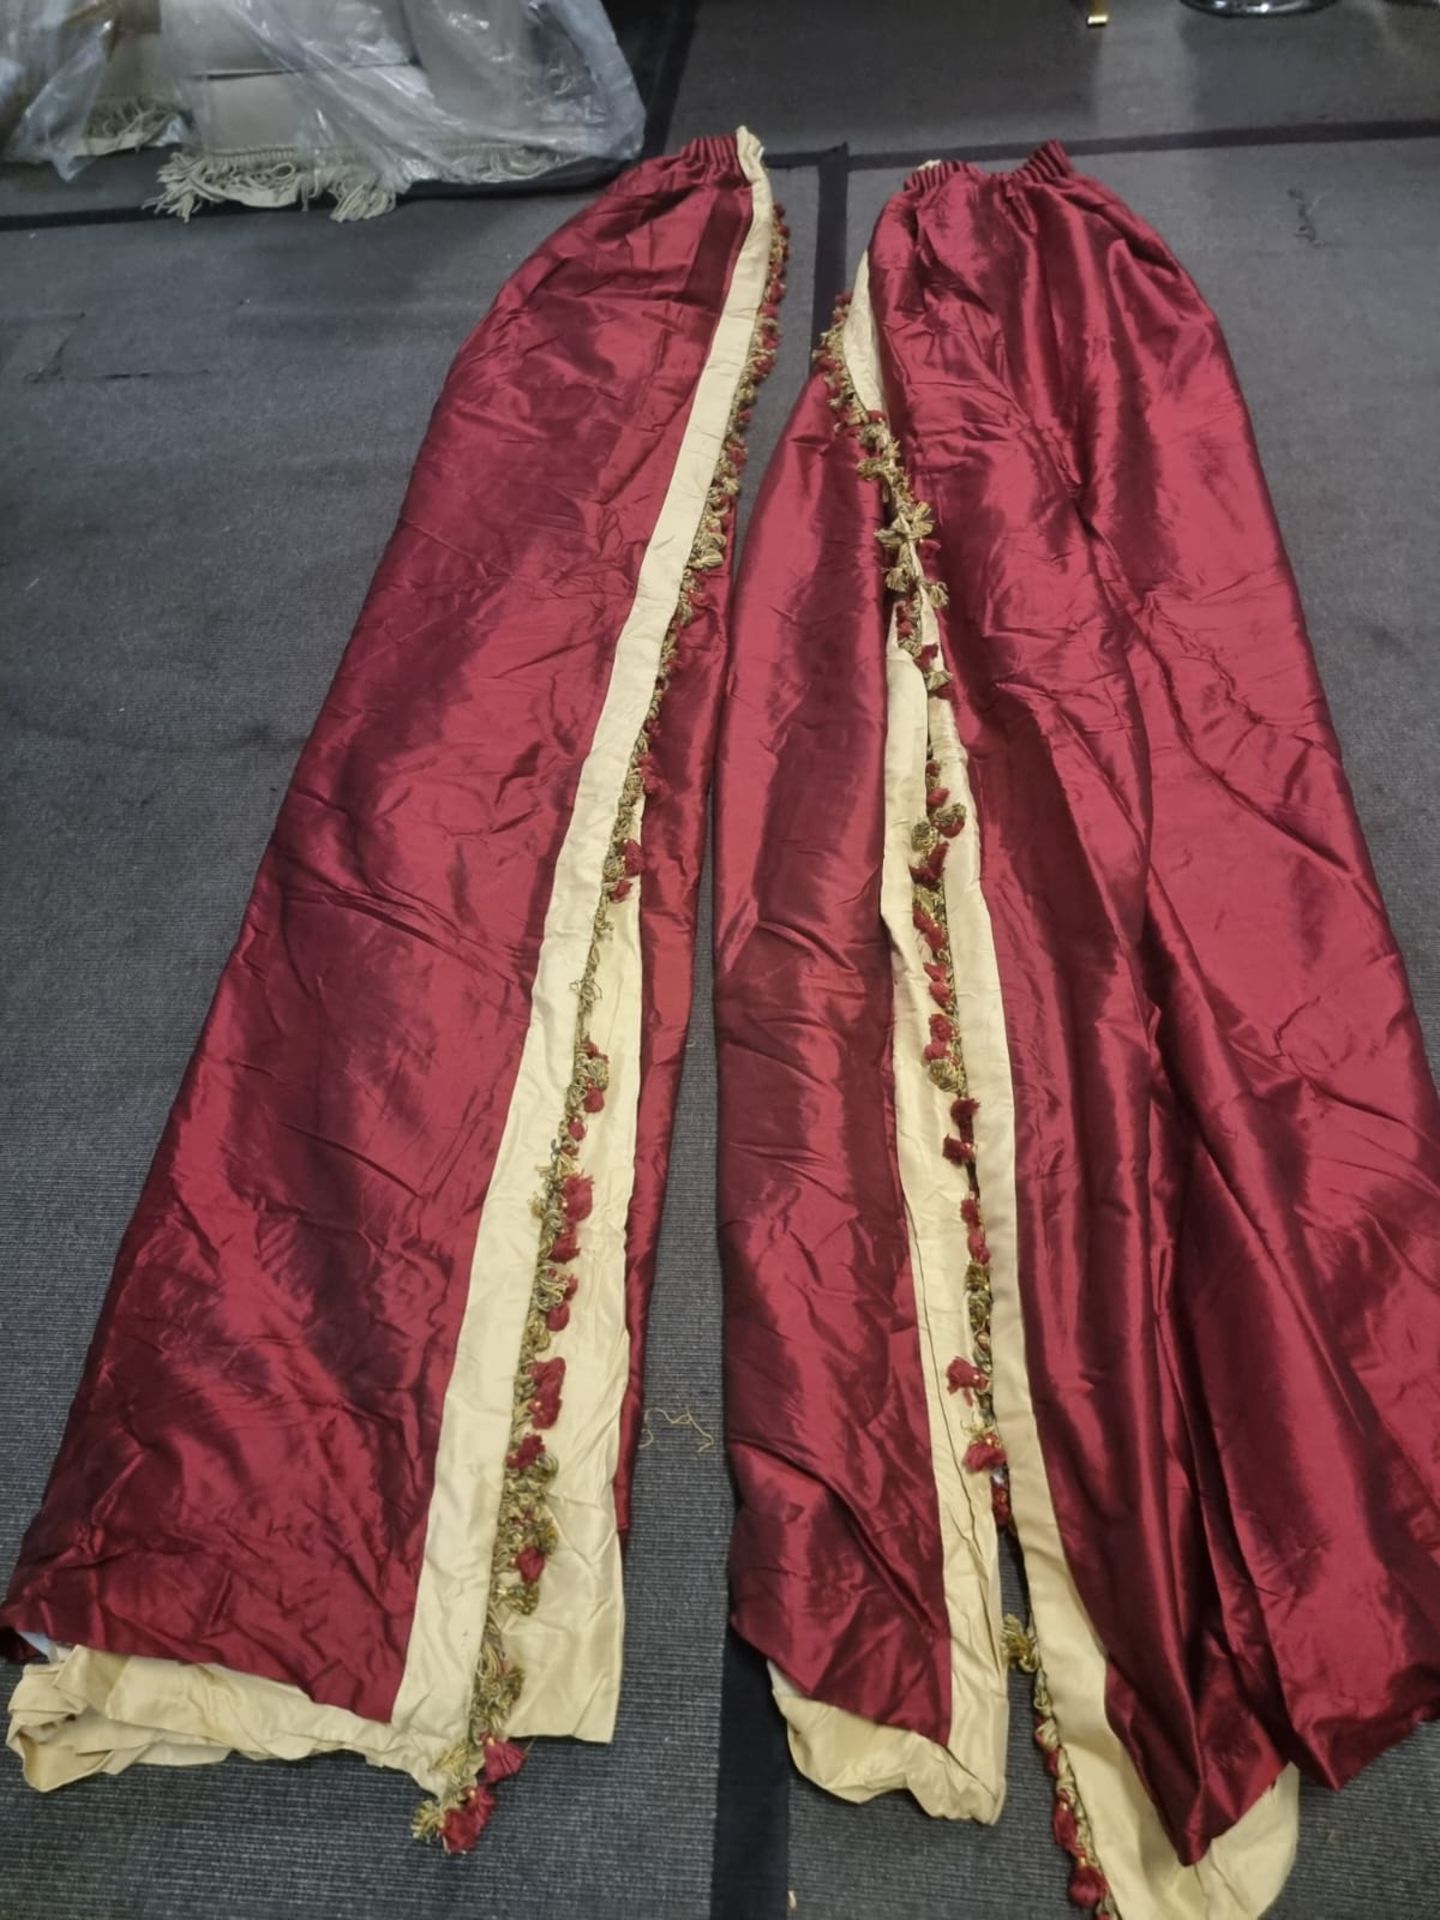 A pair of silk red and gold drapes pencil pleat with tassel fringe each panel 64cm wide x 260cm drop - Image 3 of 7